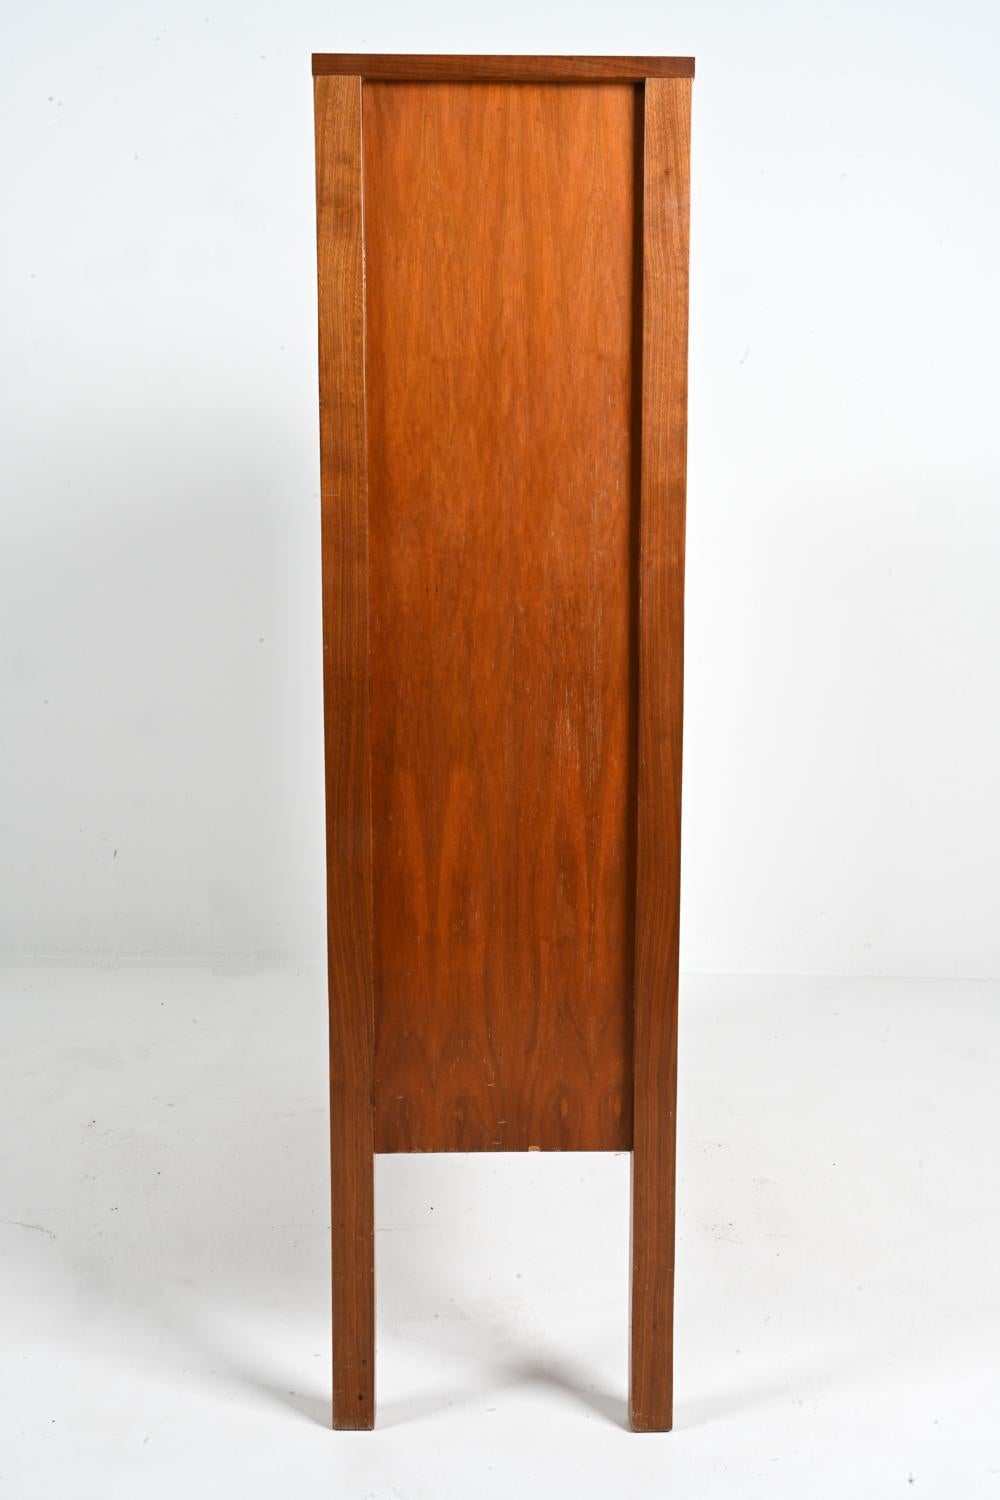 German Mid-Century Teak Woven-Front Tall Cabinet by Leo Bub, c. 1960 8